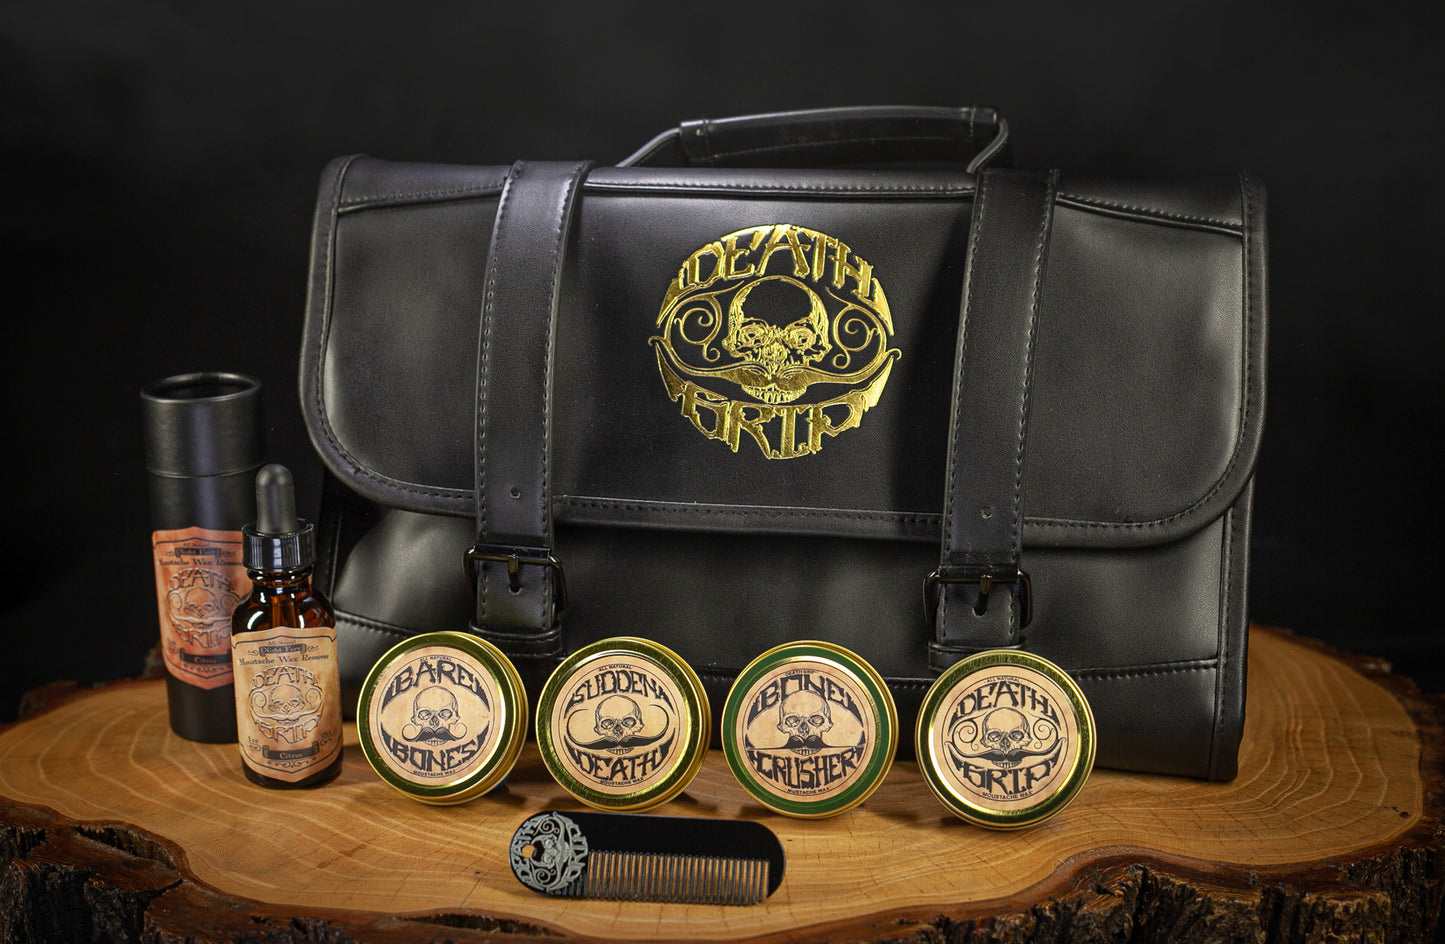 Death Grip Ultimate Mustache Kit | Includes 4 Mustache Waxes, Night Fury, Pocket Comb & Large Travel Dopp Kit